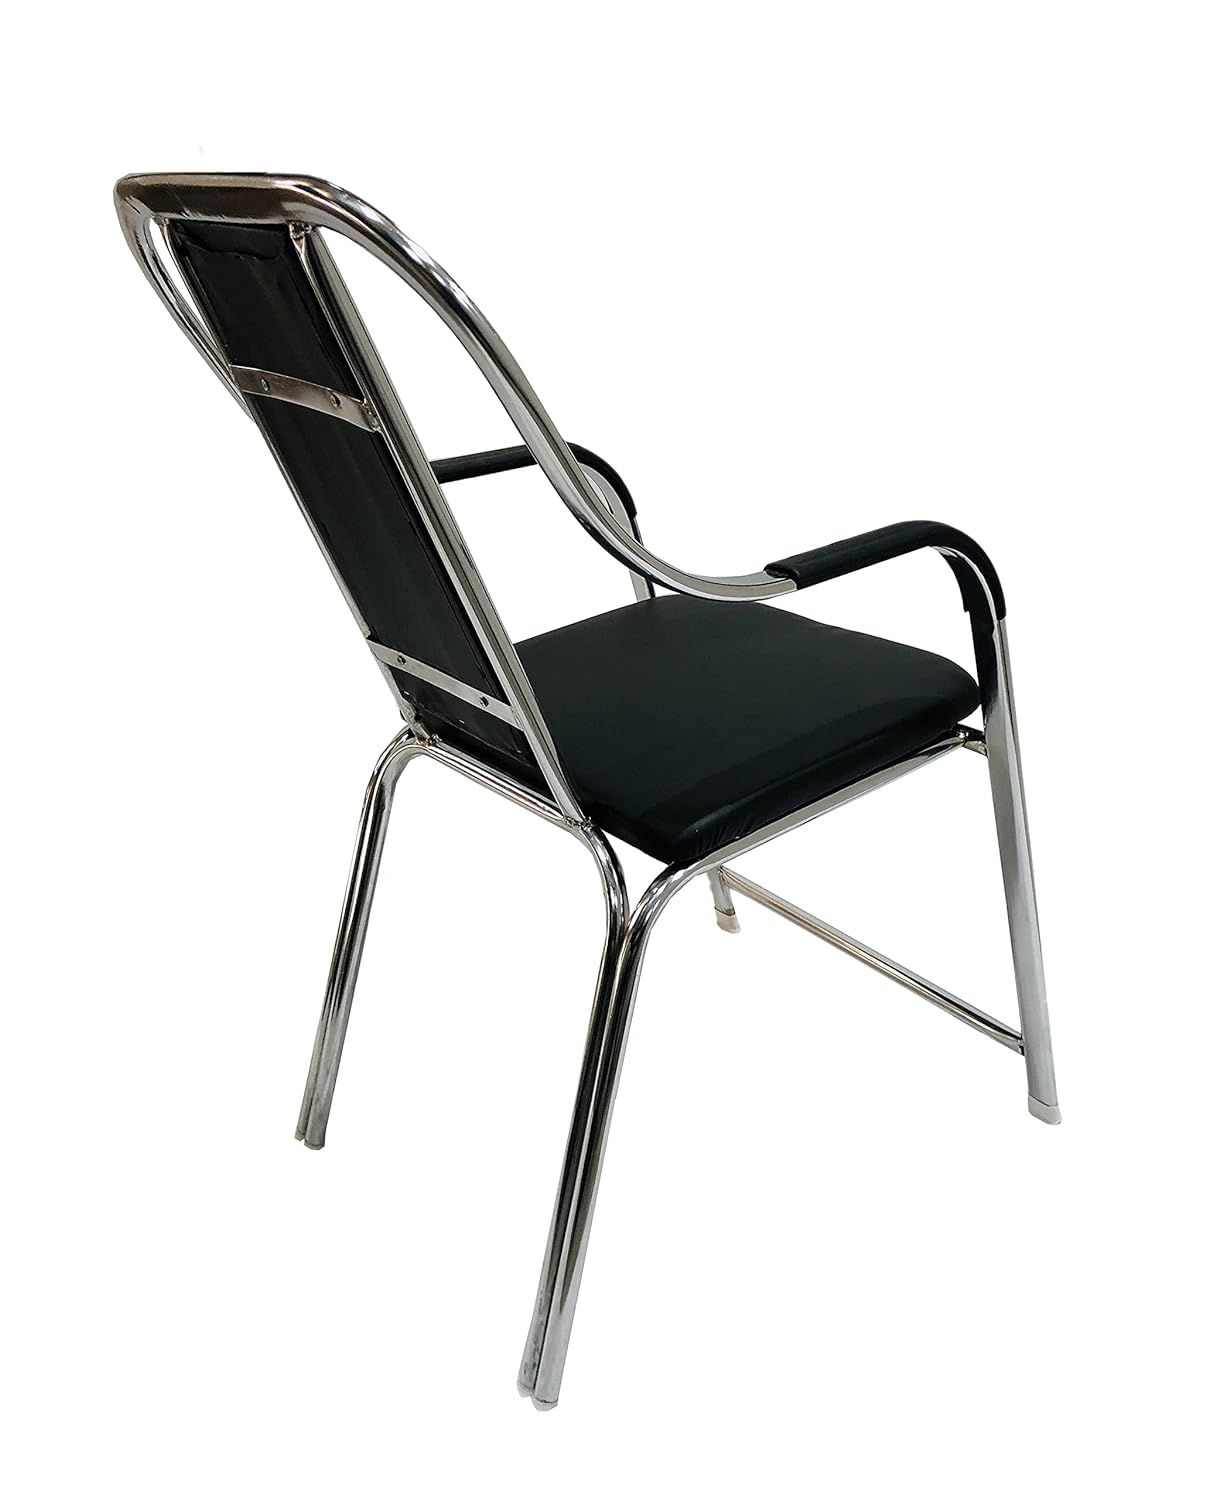 Bowzar Steel Chair Home Office with Cushion seat Back,Durable Chrome Steel Frame